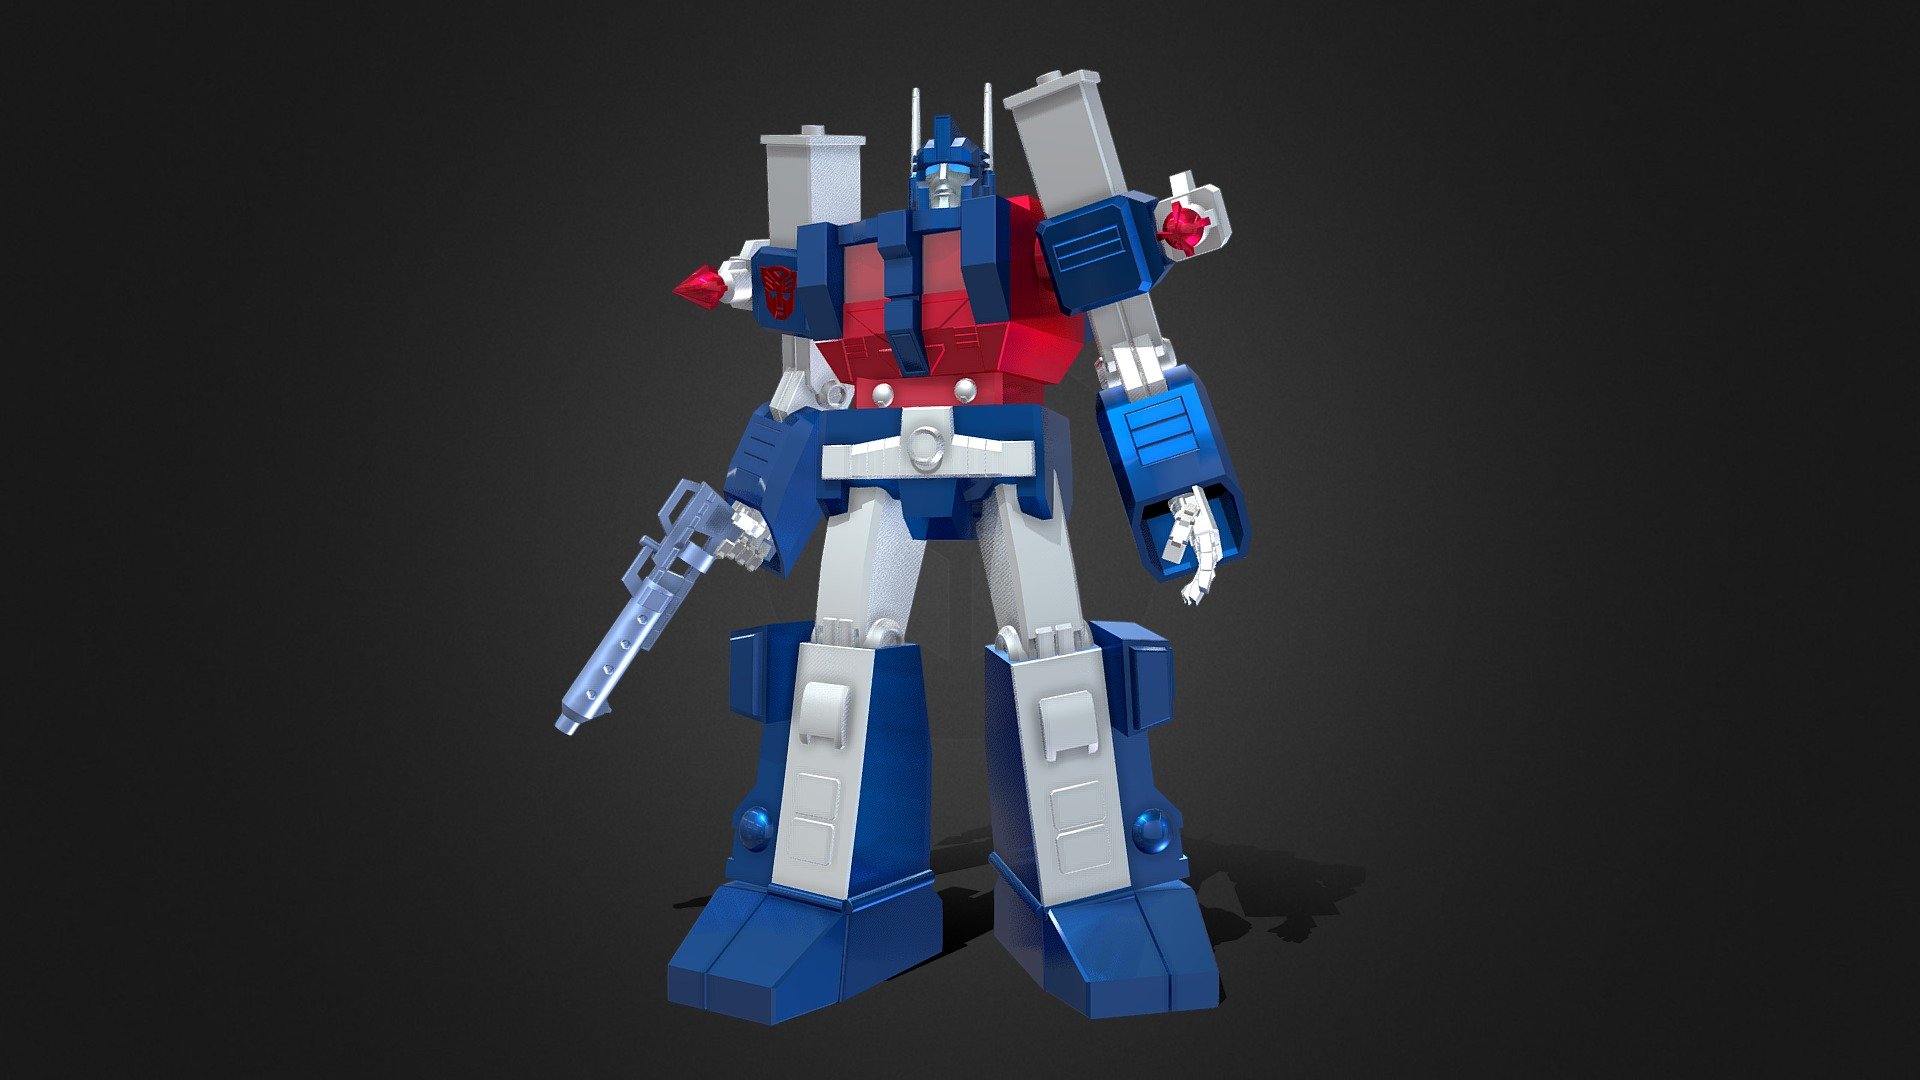 If you’re interested in purchasing any of my models, contact me @ andrewdisaacs@yahoo.com

Ultra Magnus from Transformers The Movie and Season 3 of the Transformers G1 cartoon.

Made by myself in 3DS Max 3d model